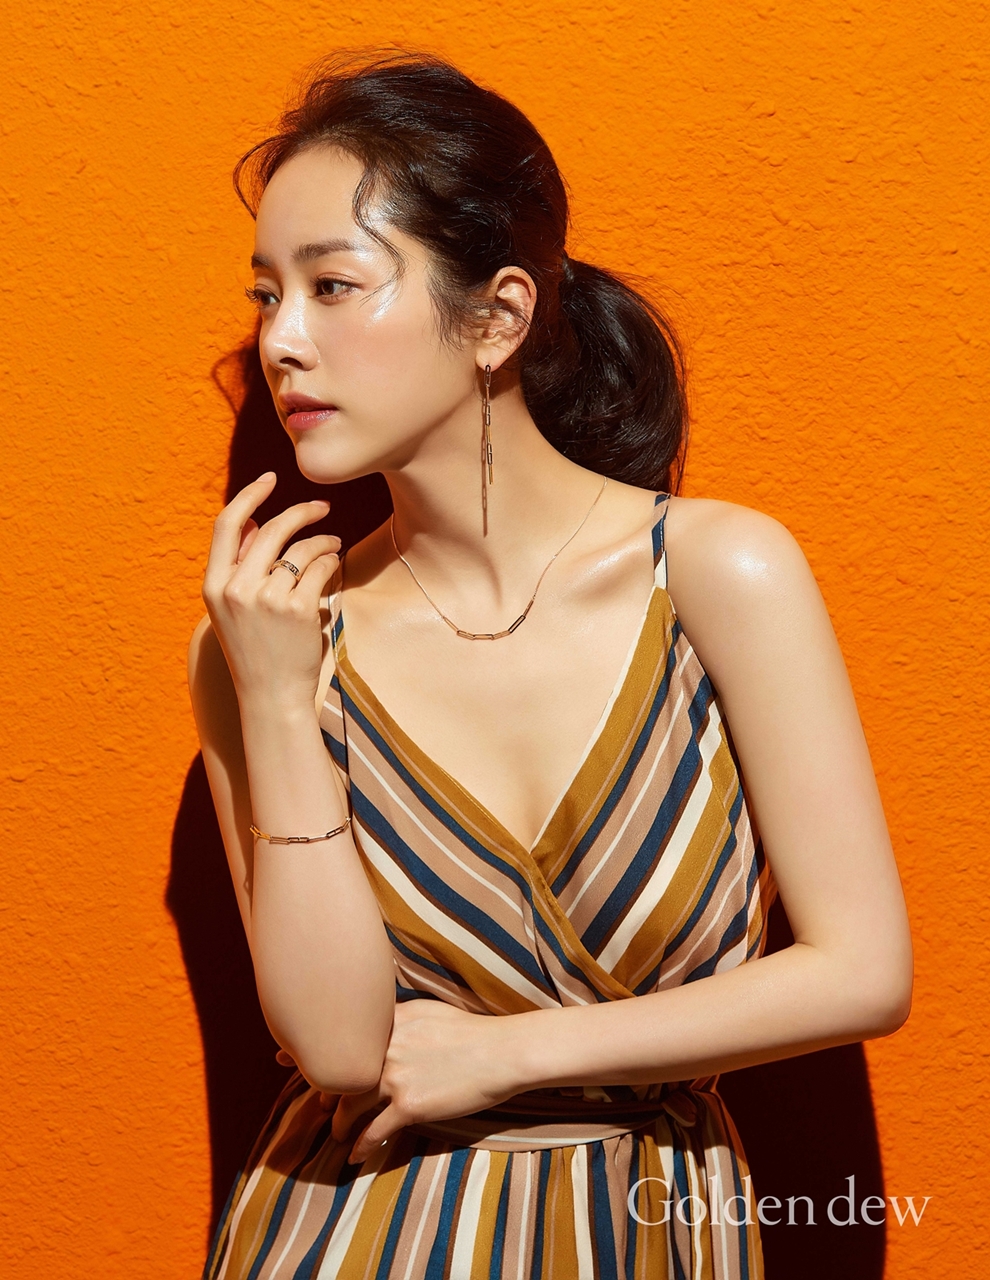 Actor Han Ji-min has emanated a variety of charms from fashion pictures.Recently, jewelry brand Goldendew released a new product picture of Muse Han Ji-min.Han Ji-min in the picture Matched the jewelery of Golden Dew with the cooler attire and perfected the Summer jewelery look.Han Ji-min, who wore a deep-pinned V-neck dress, showed her shoulders and neckline in a ponytail hairstyle, adding sophistication by Matching thin chain-decorated jewelery.In another cut, she Matched a thin V-neck neat with a jewelery with a bold motif, a monotonous neat look that quickly transformed into a luxurious look.The new products of Golden Dew worn by Han Ji-min can be found at Golden Dew Cheongdam Headquarters, Seoul Arts Center, and department store stores nationwide.